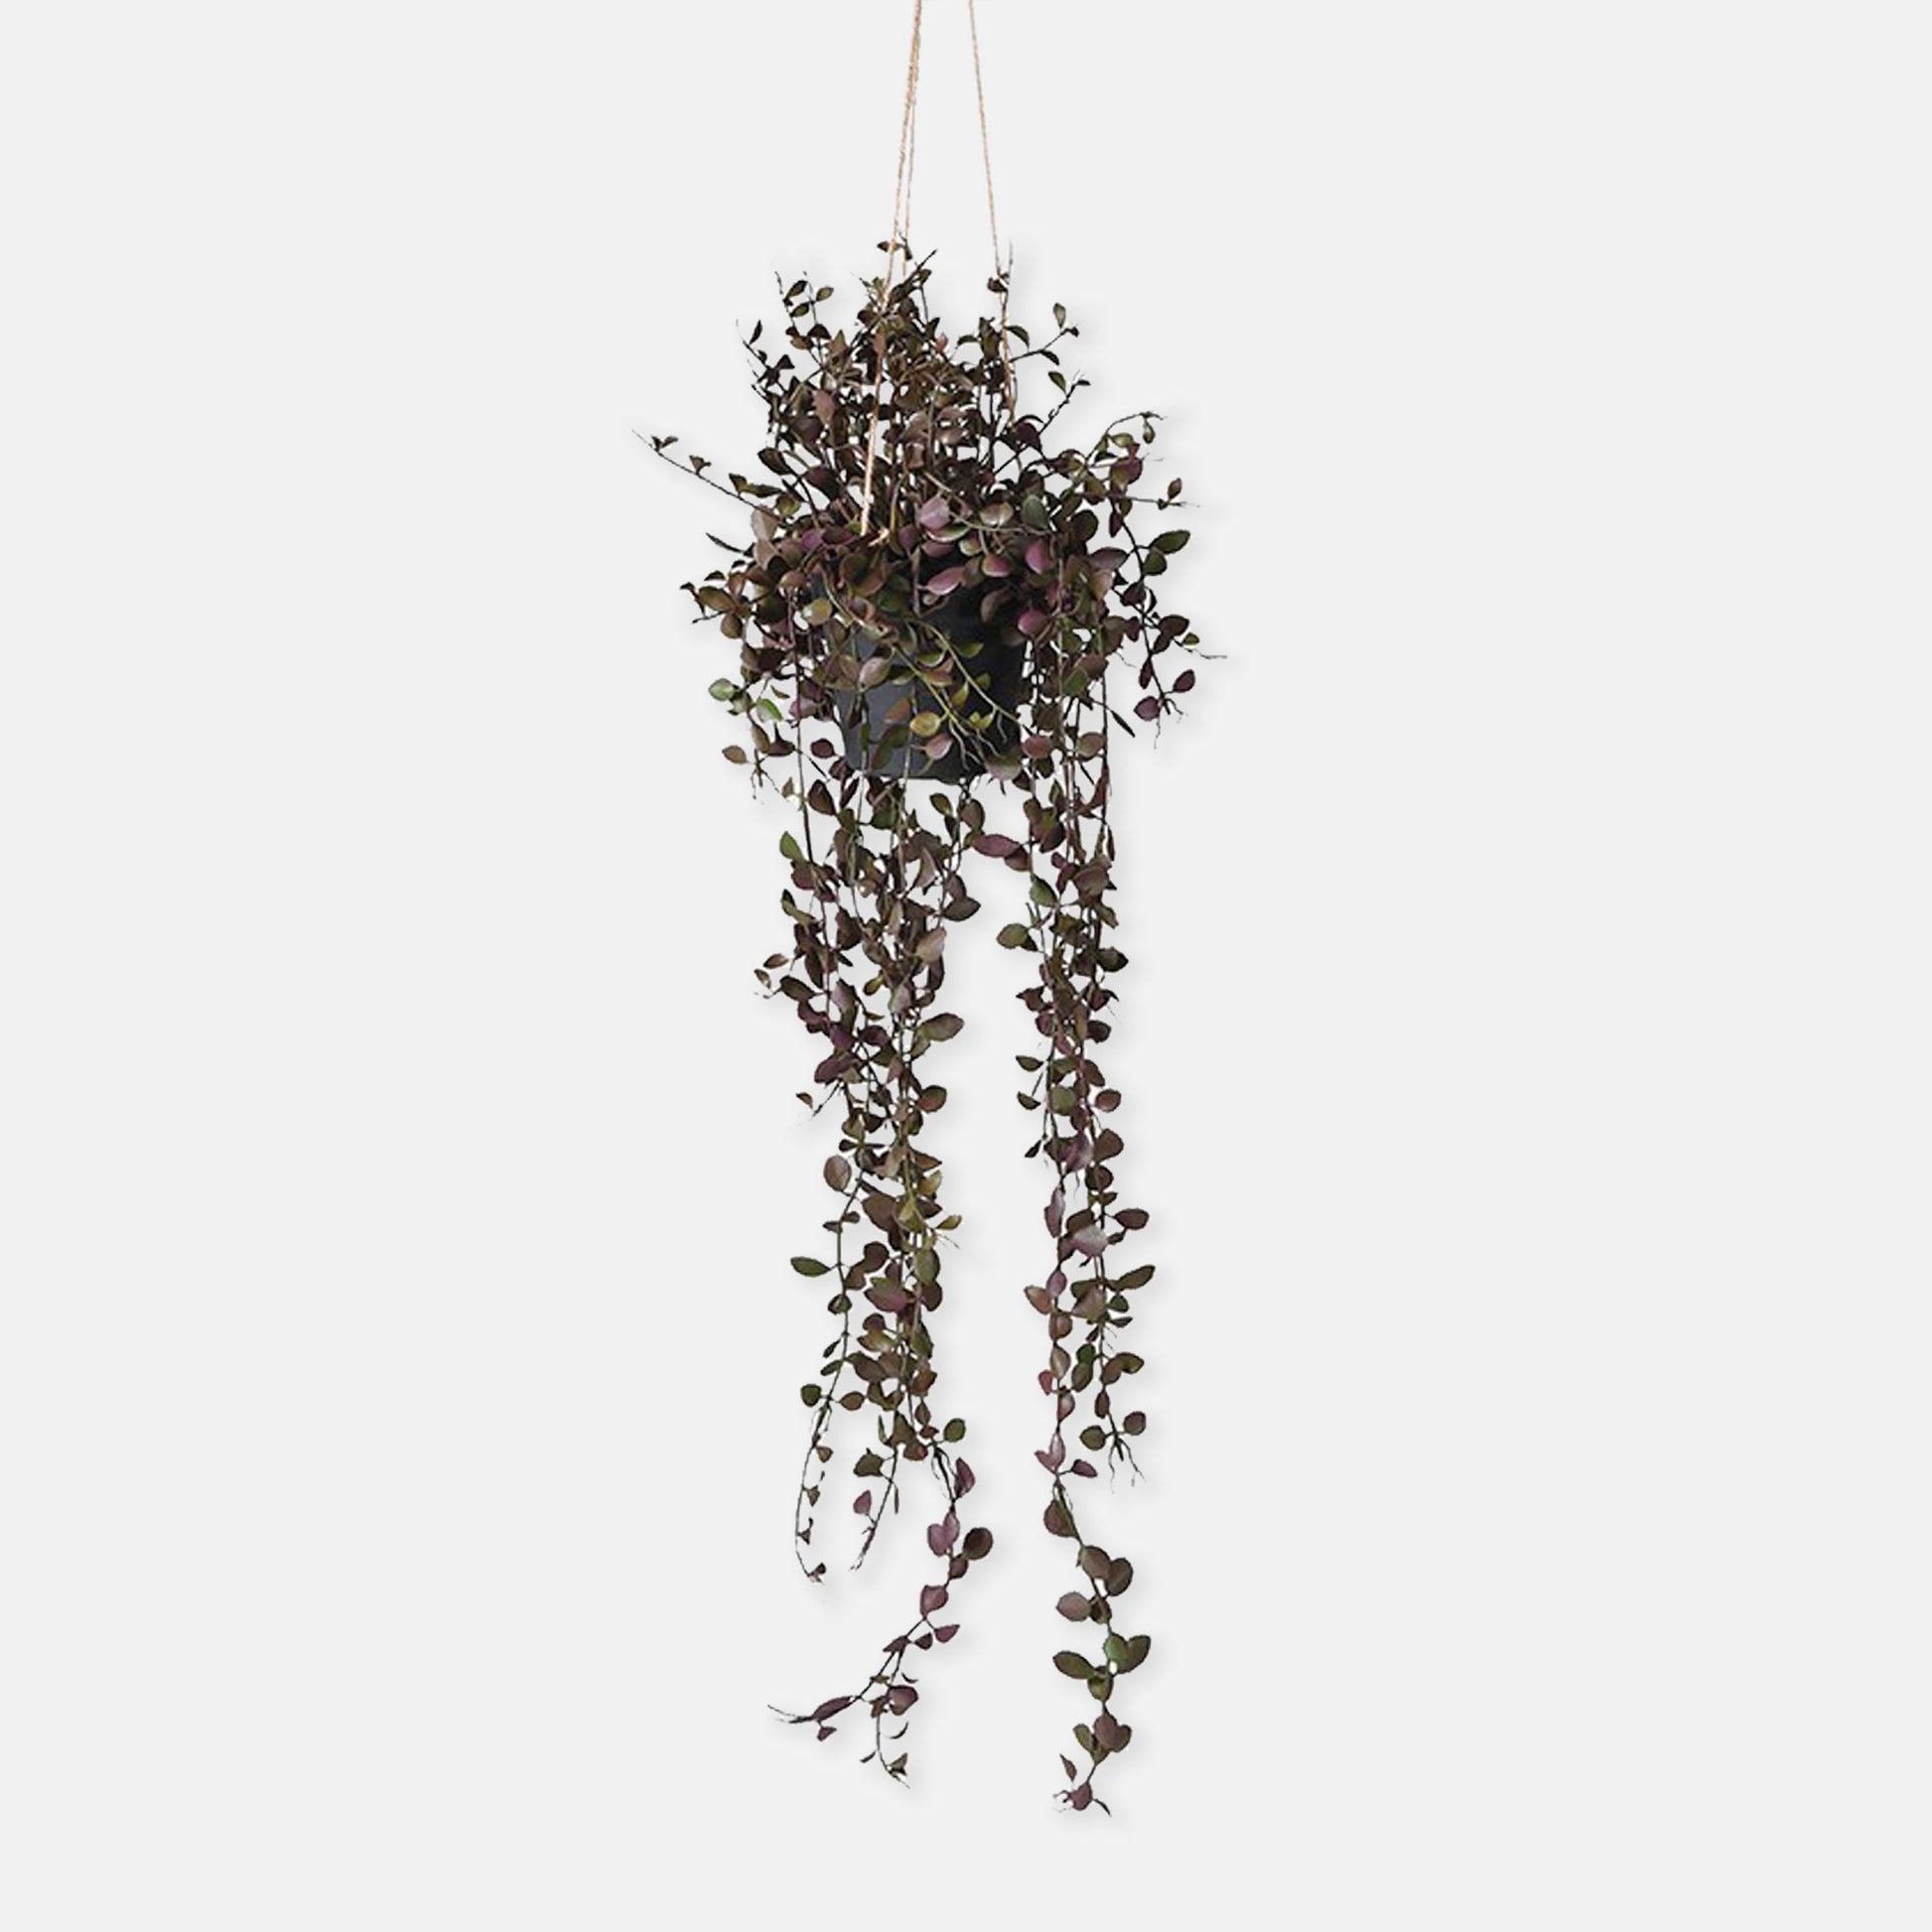 Artificial trailing plant with purple leaves, set in black pot with rope for hanging.